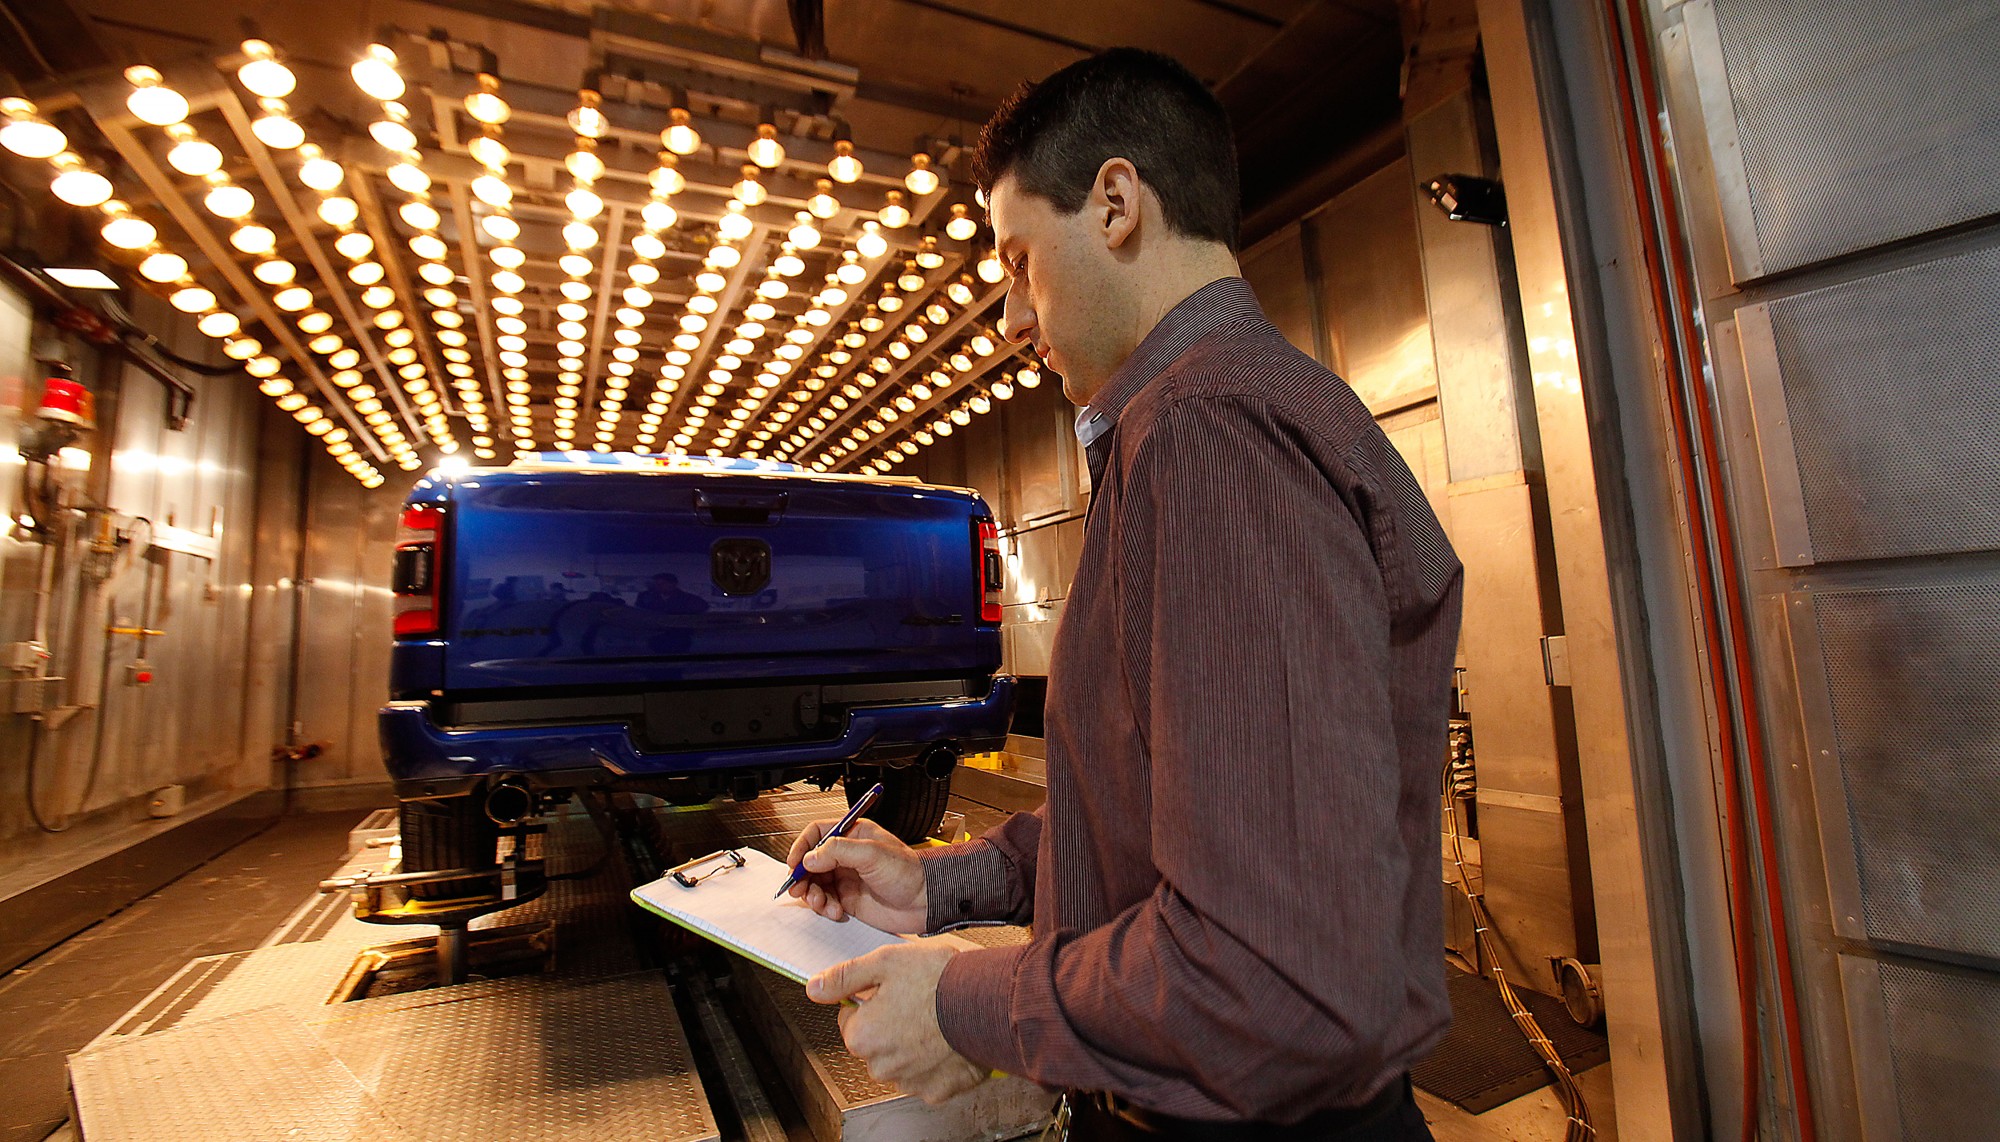 A student examines a vehicle under heat testing lamps.